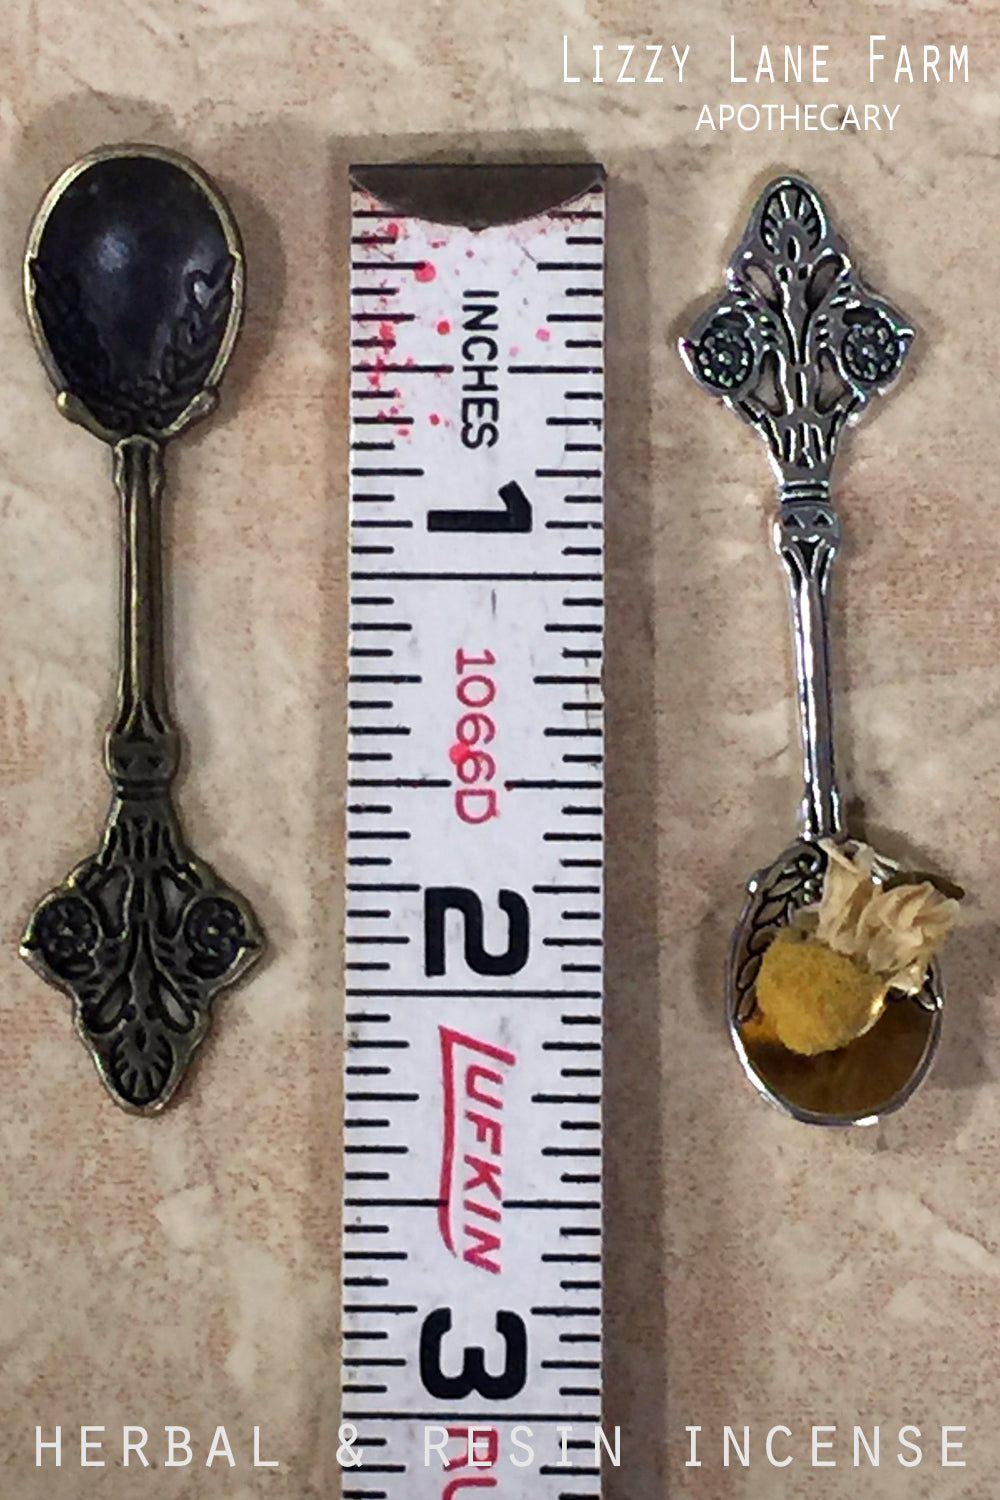 Incense Spoon | Vintage Style Apothecary Teaspoon | Witches Spoon | Herbal Spoons | Altar Tools